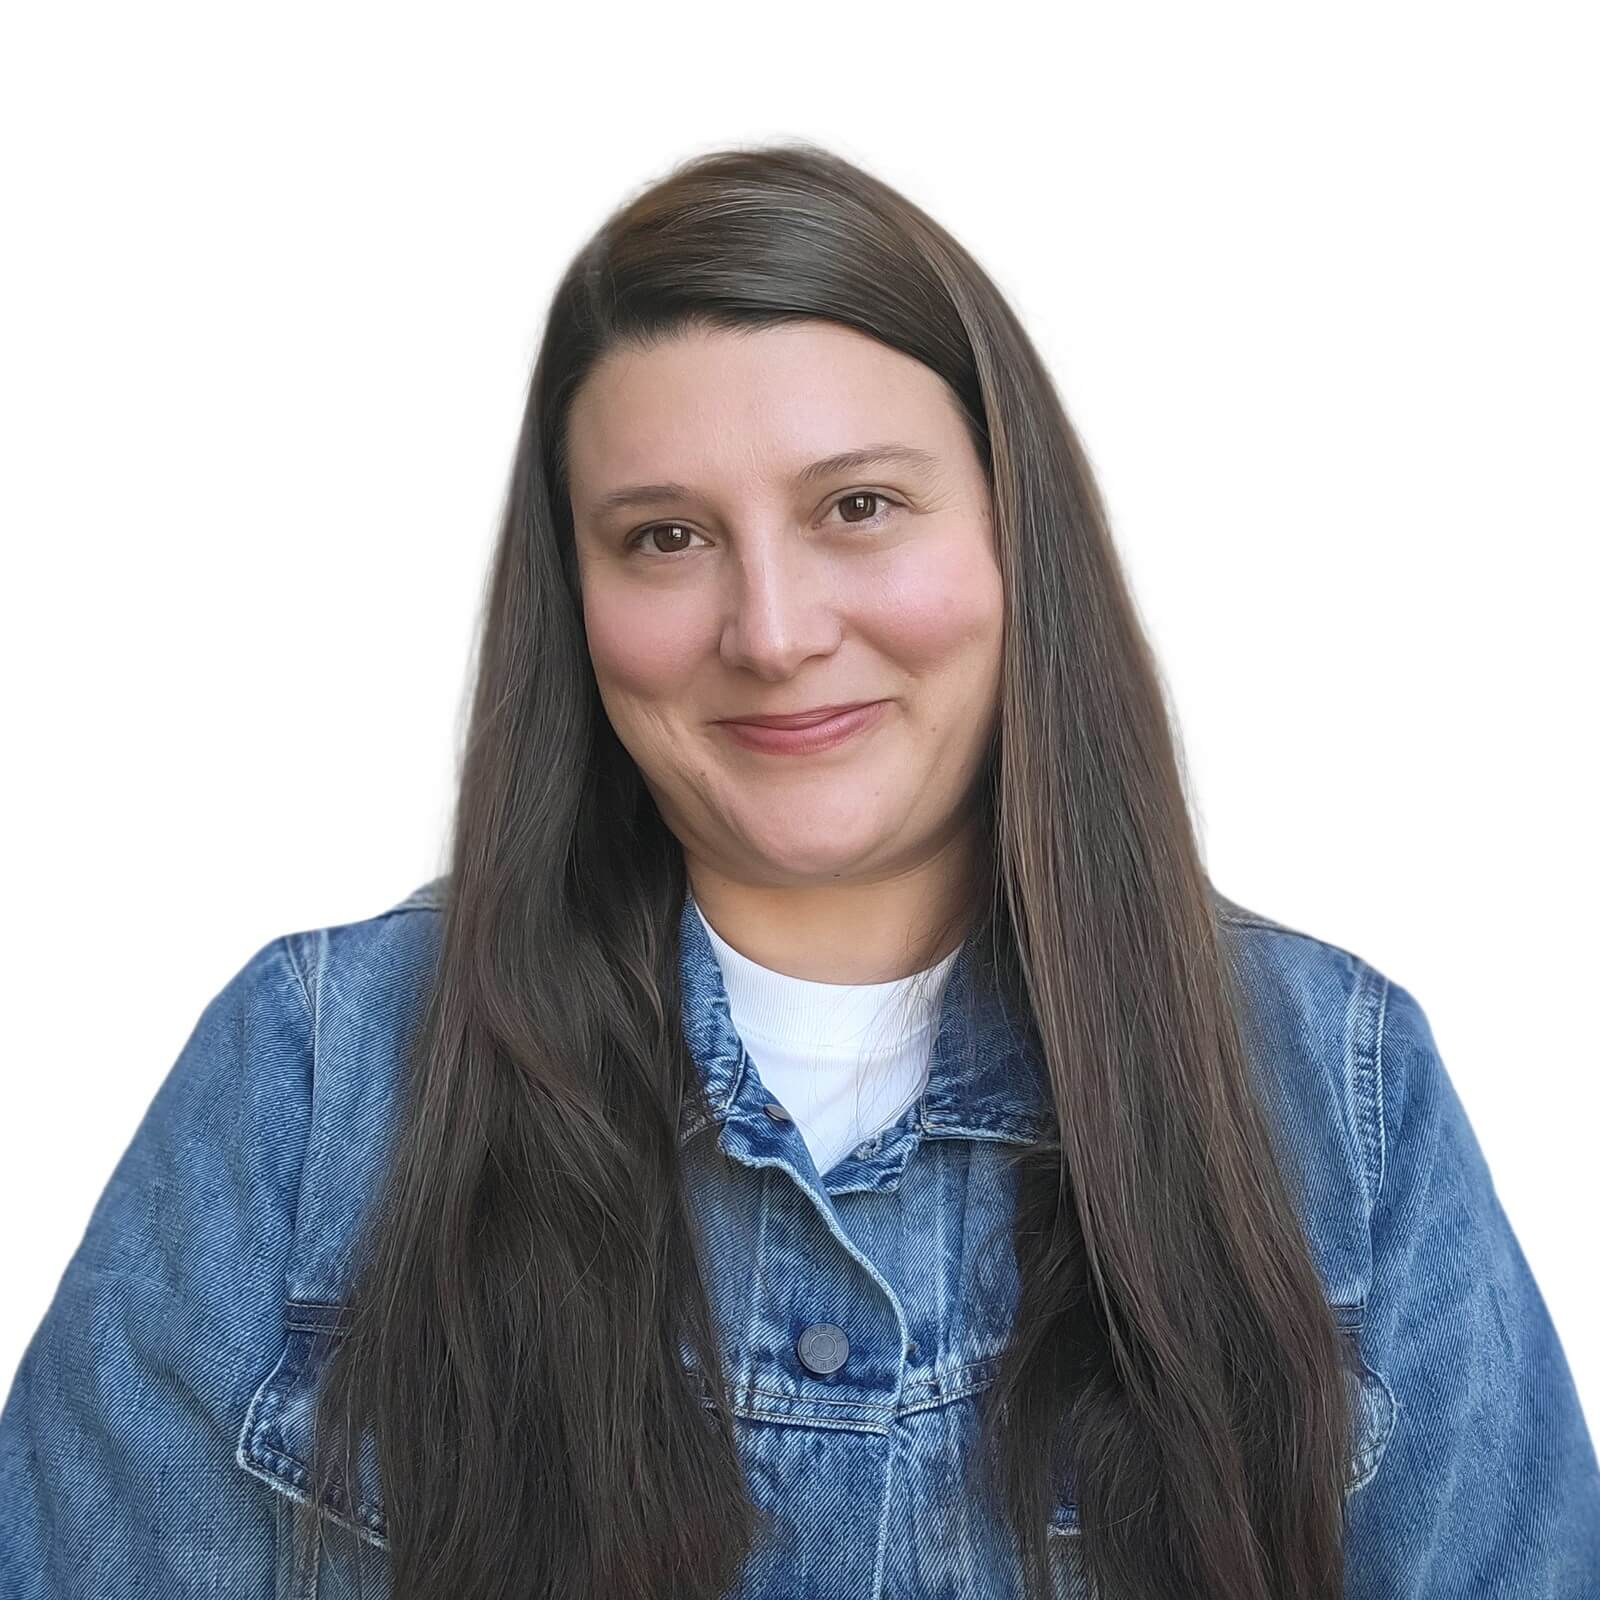 A person with long brown hair is wearing a denim jacket over a white shirt. They are smiling and have a plain white background behind them.